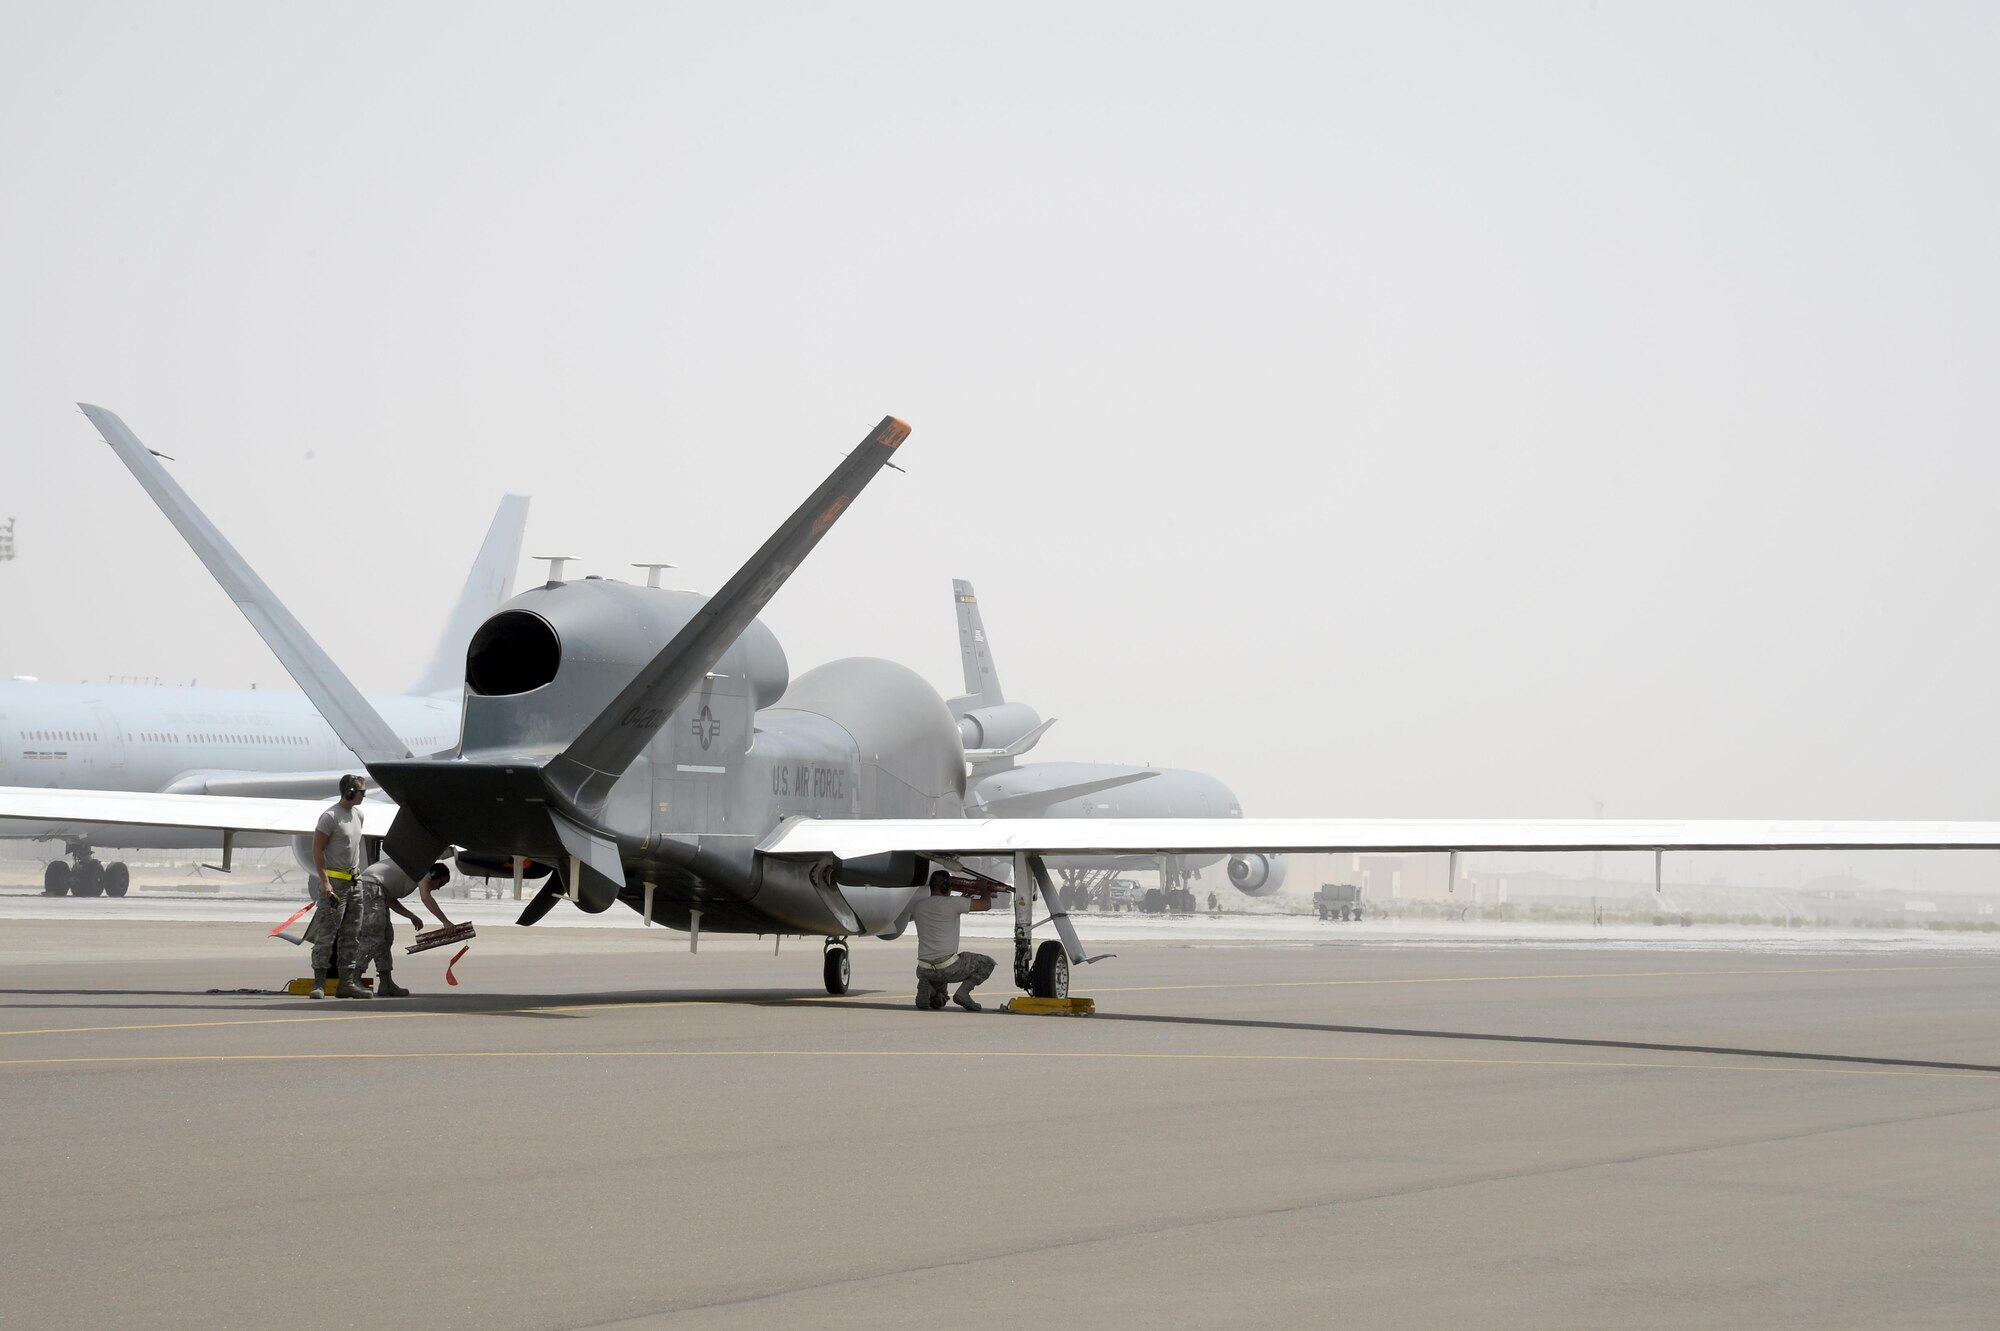 Airmen with the Hawk Aircraft Maintenance Unit prepare a RQ-4 Global Hawk for towing after it landed from a 30.5 hour flight at an undisclosed location in Southwest Asia Mar. 8, 2015. The Global Hawk has been deployed operationally to support overseas contingency operations since November 2001. (U.S. Air Force photo/Tech. Sgt. Marie Brown)